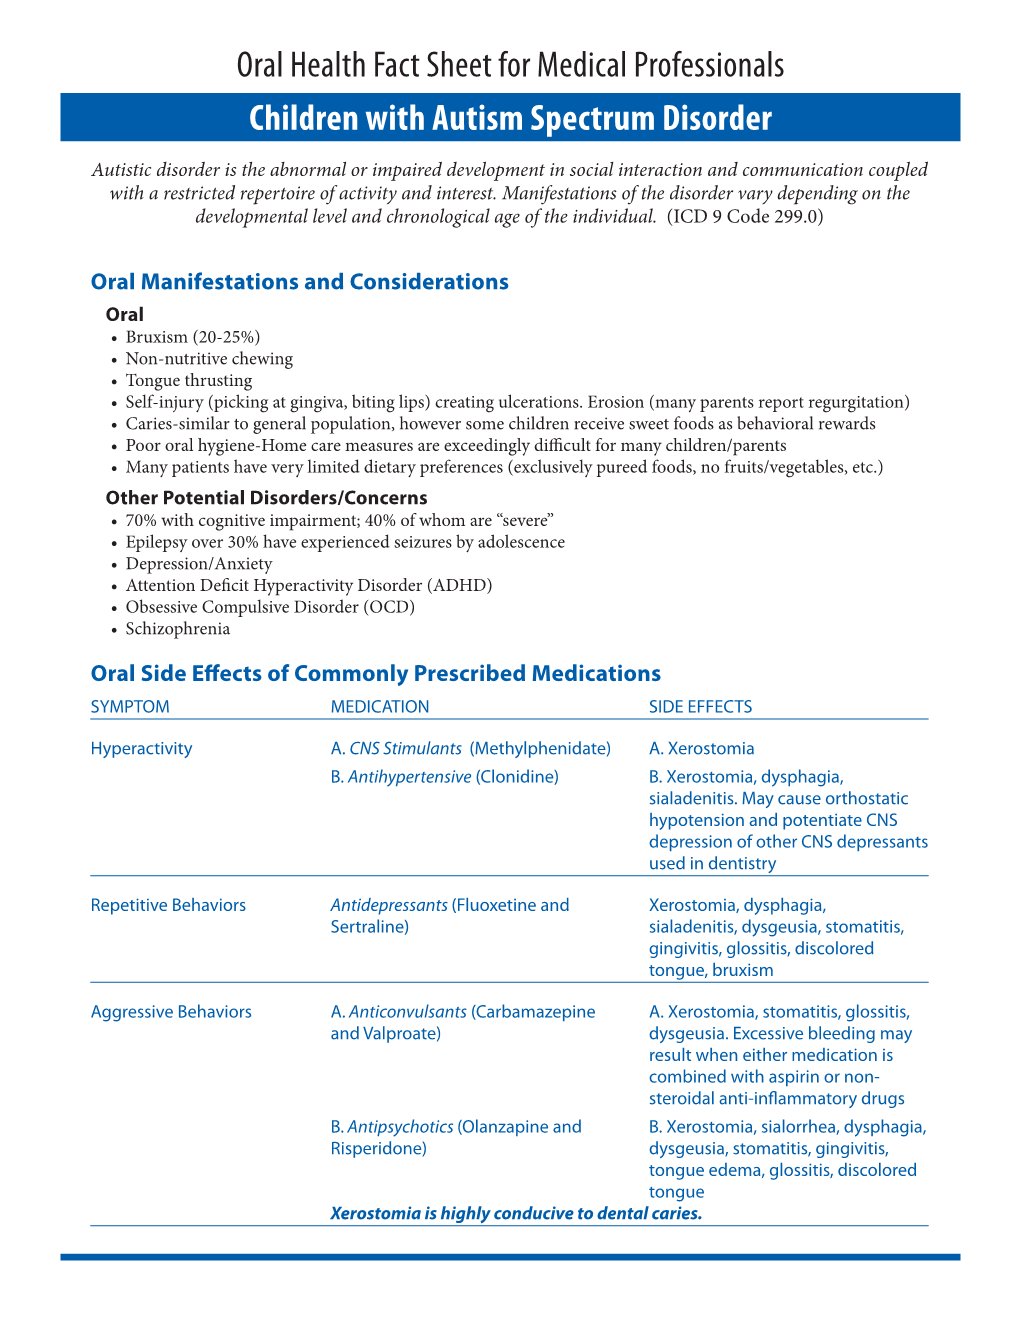 Oral Health Fact Sheet for Medical Professionals: Children with Autism